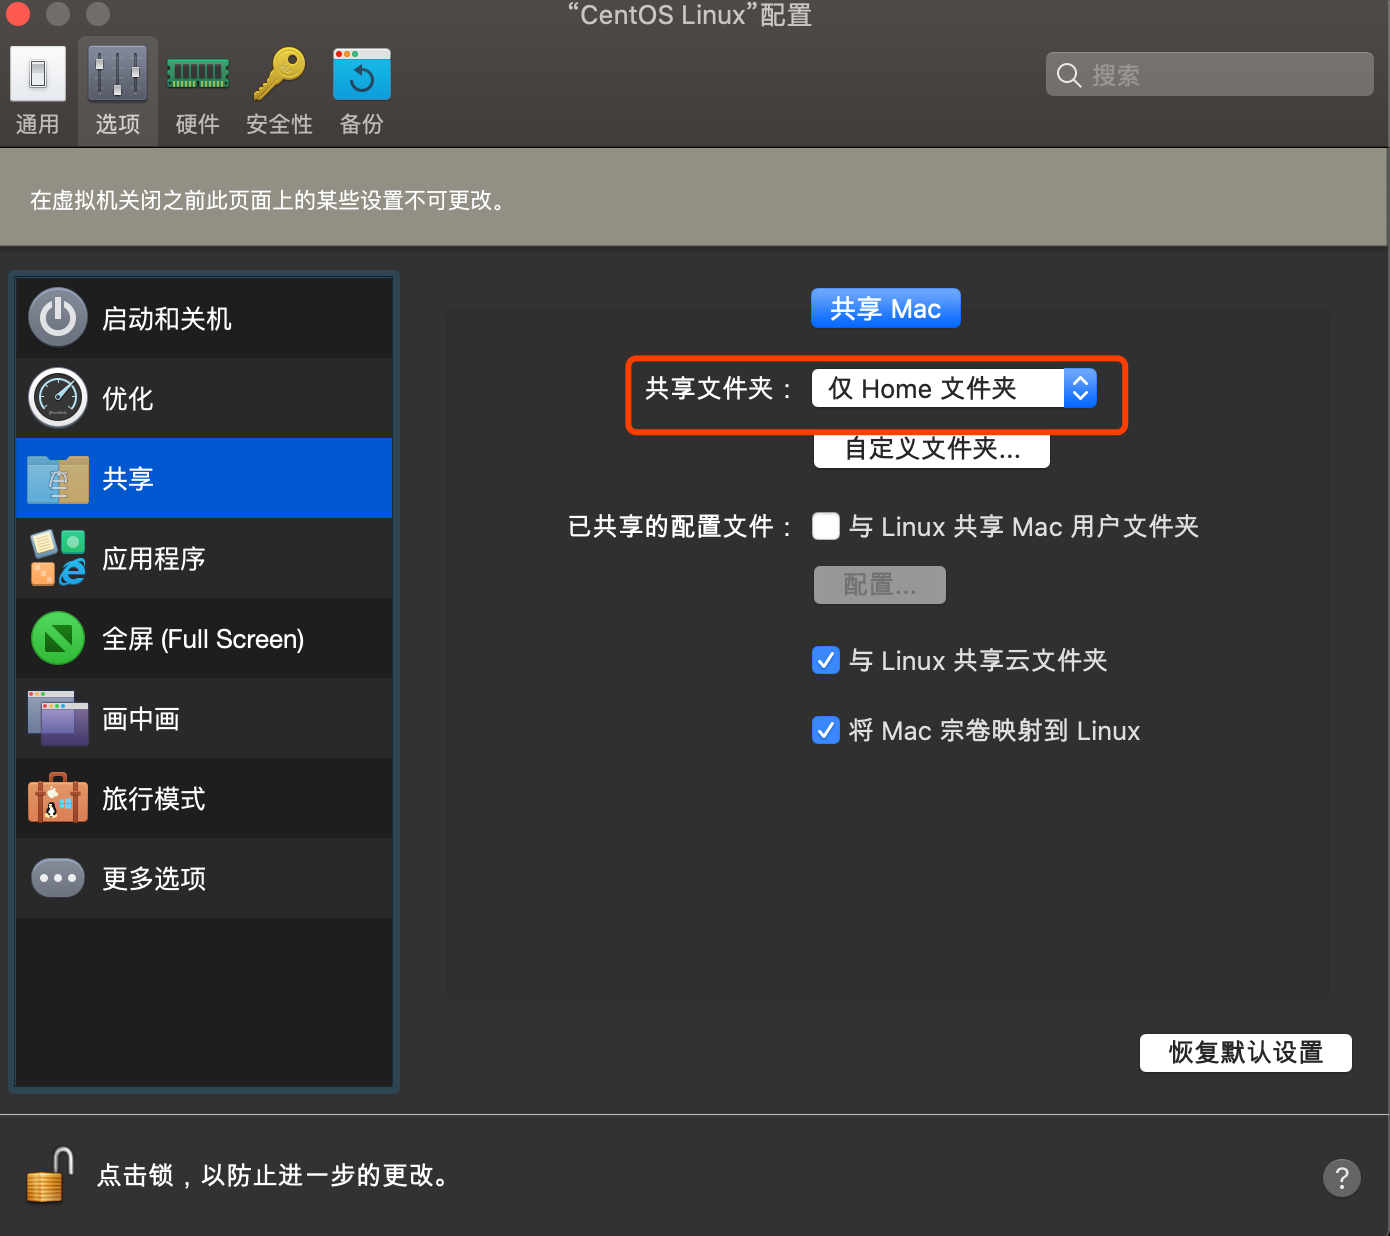 parallels vms-ParallelsVMs：开启虚拟世界的超级奇妙冒险之旅